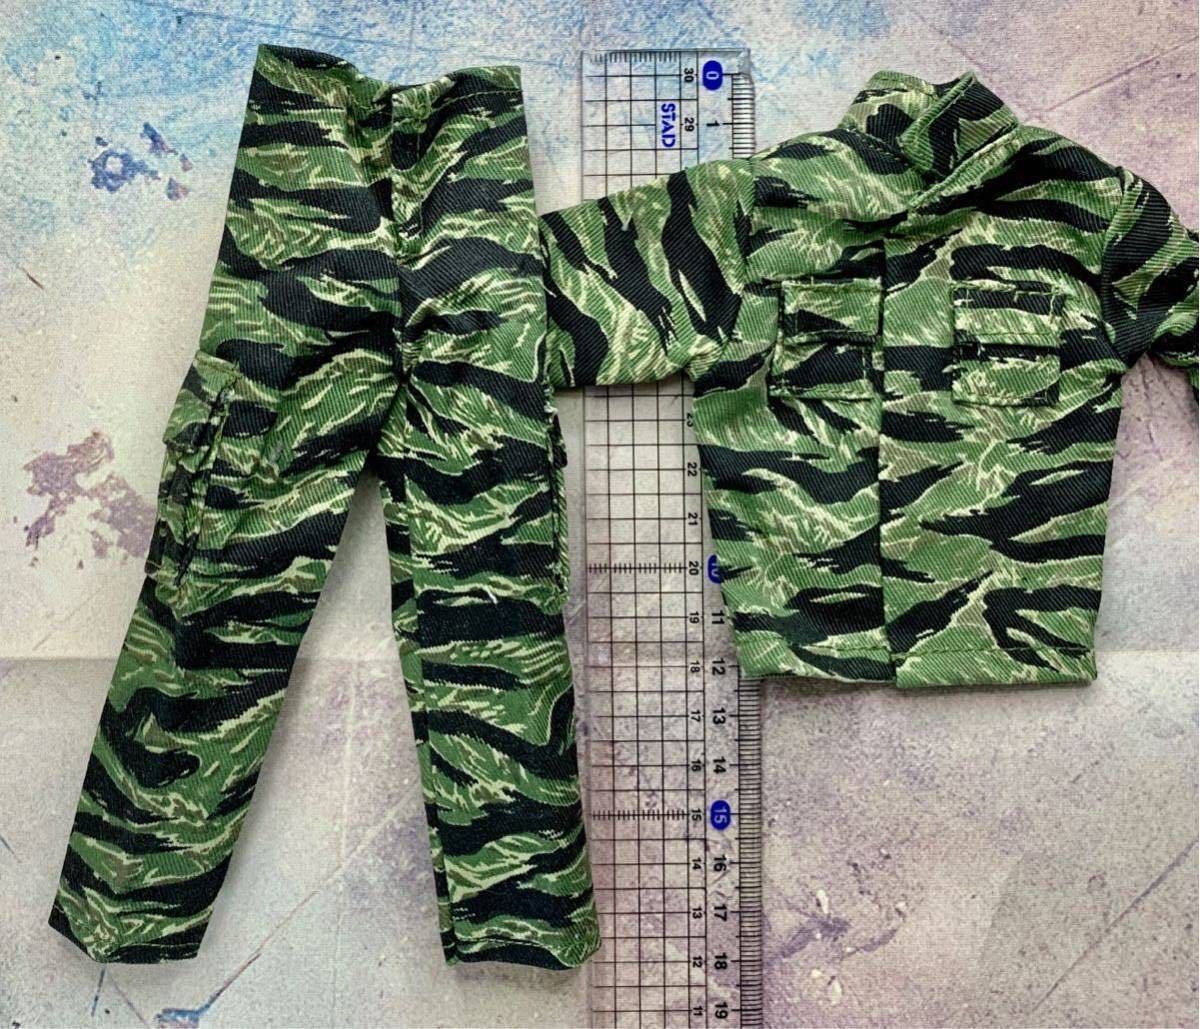  figure wear * camouflage pattern top and bottom 2 point set military military uniform 1/6 scale figure clothes ticket military uniform GI Joe 